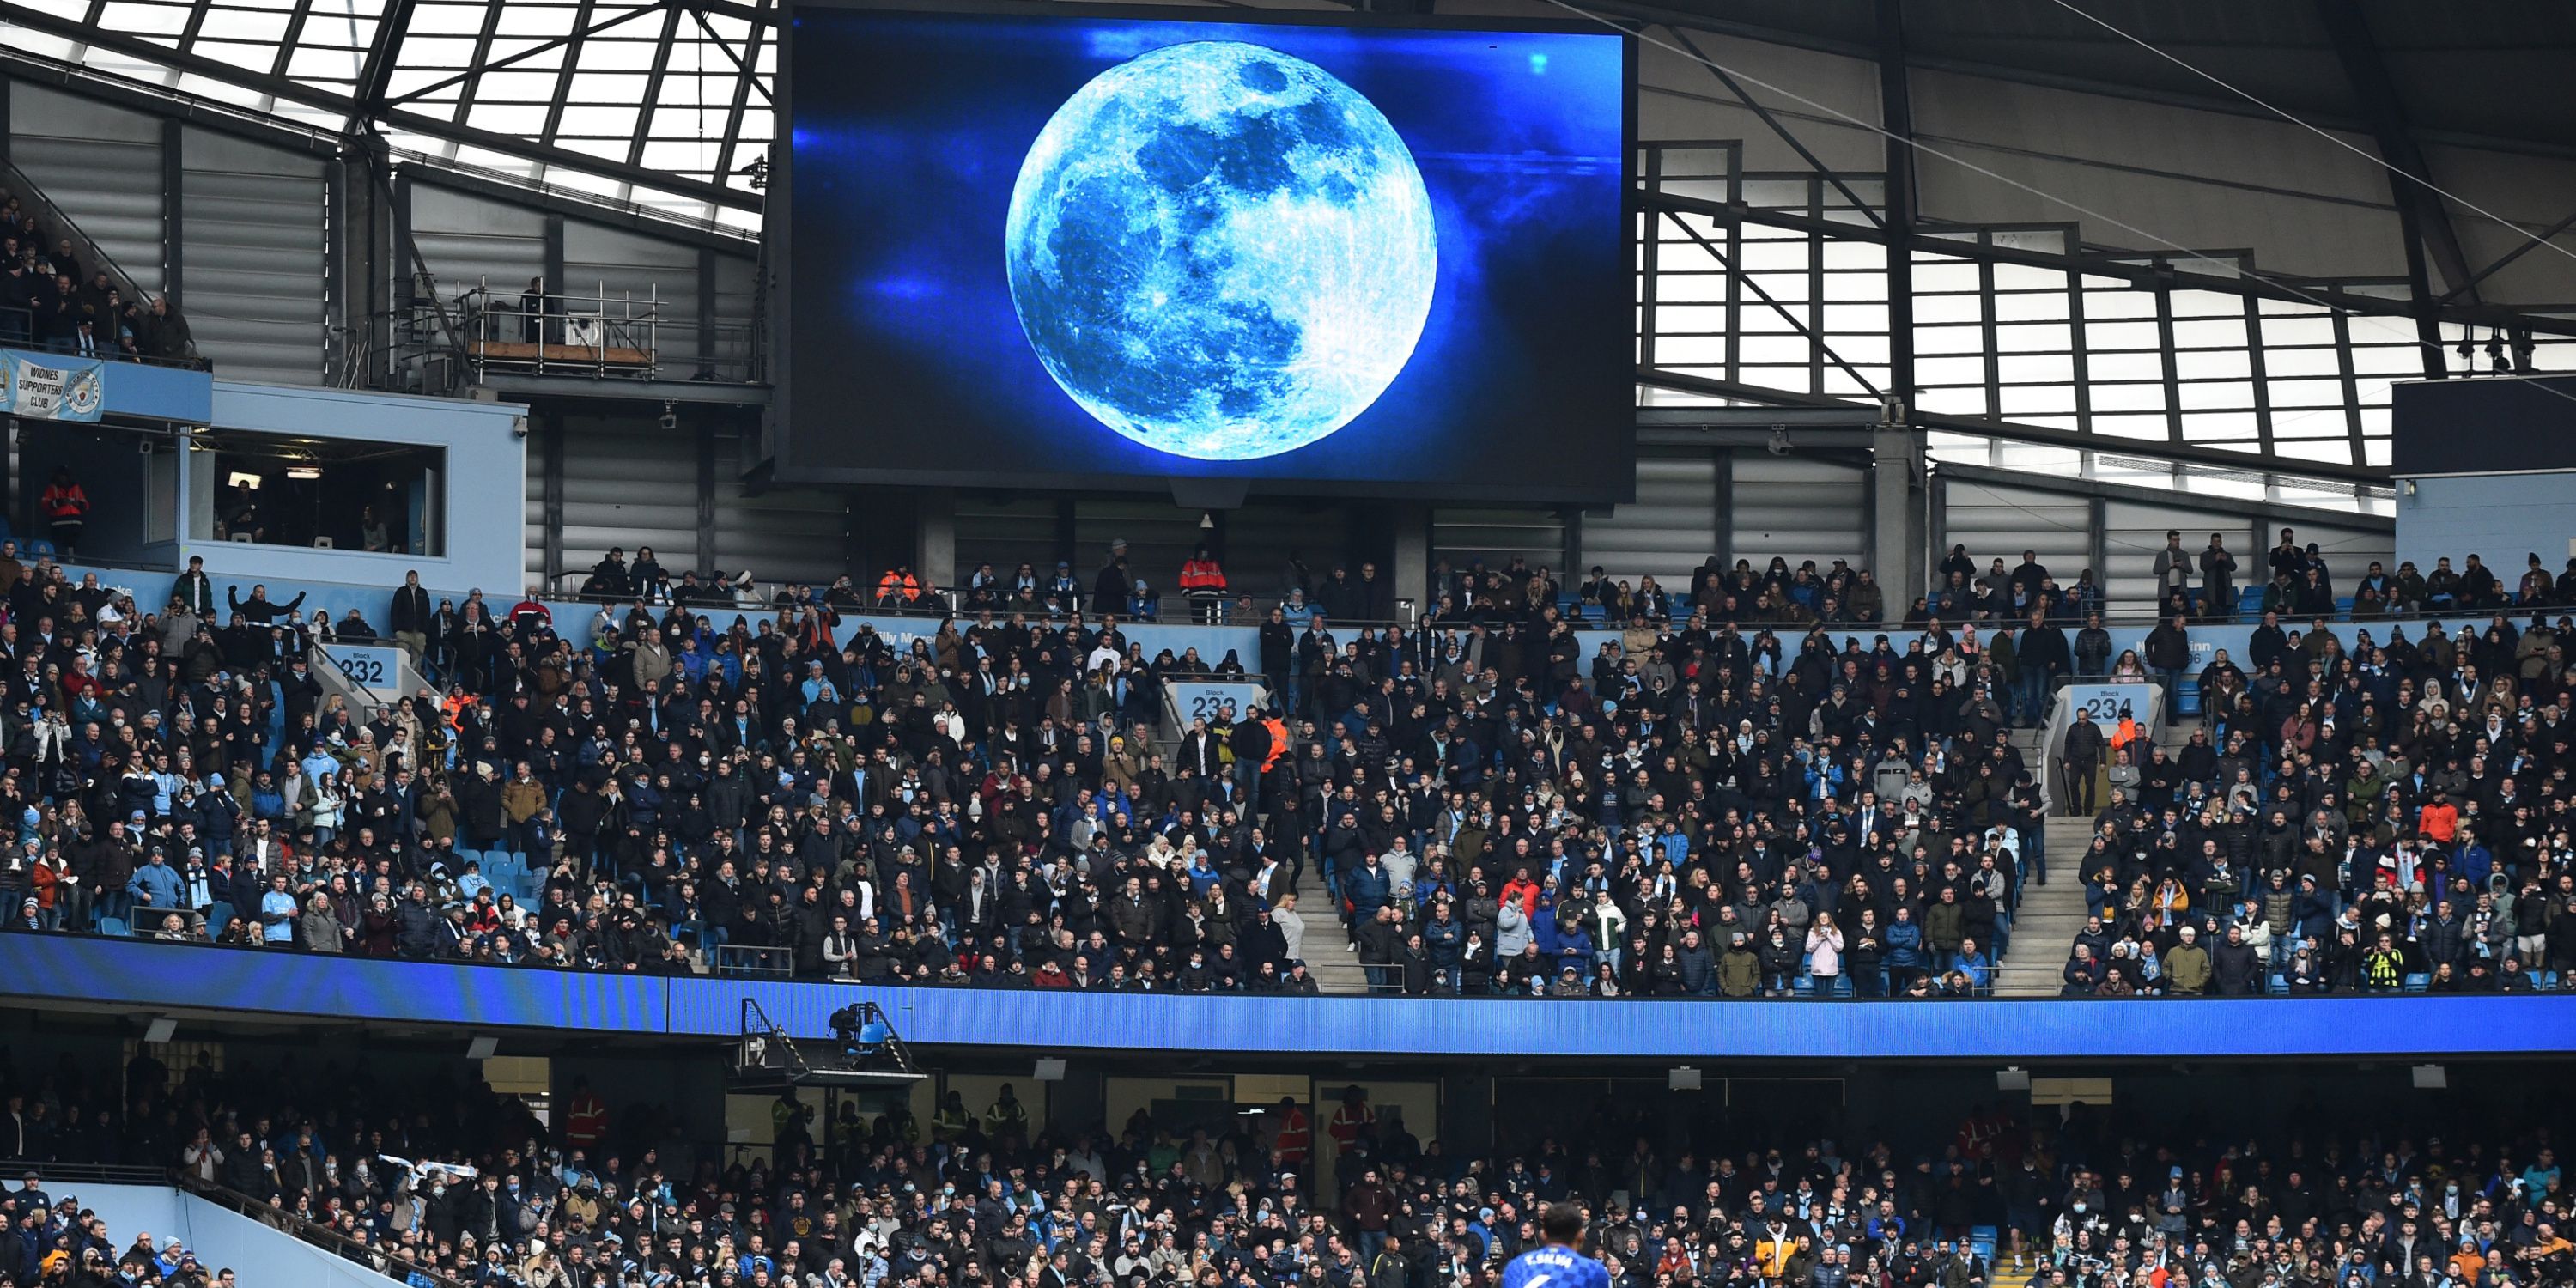 An image of blue moon beamed onto a screen in Manchester City's stadium